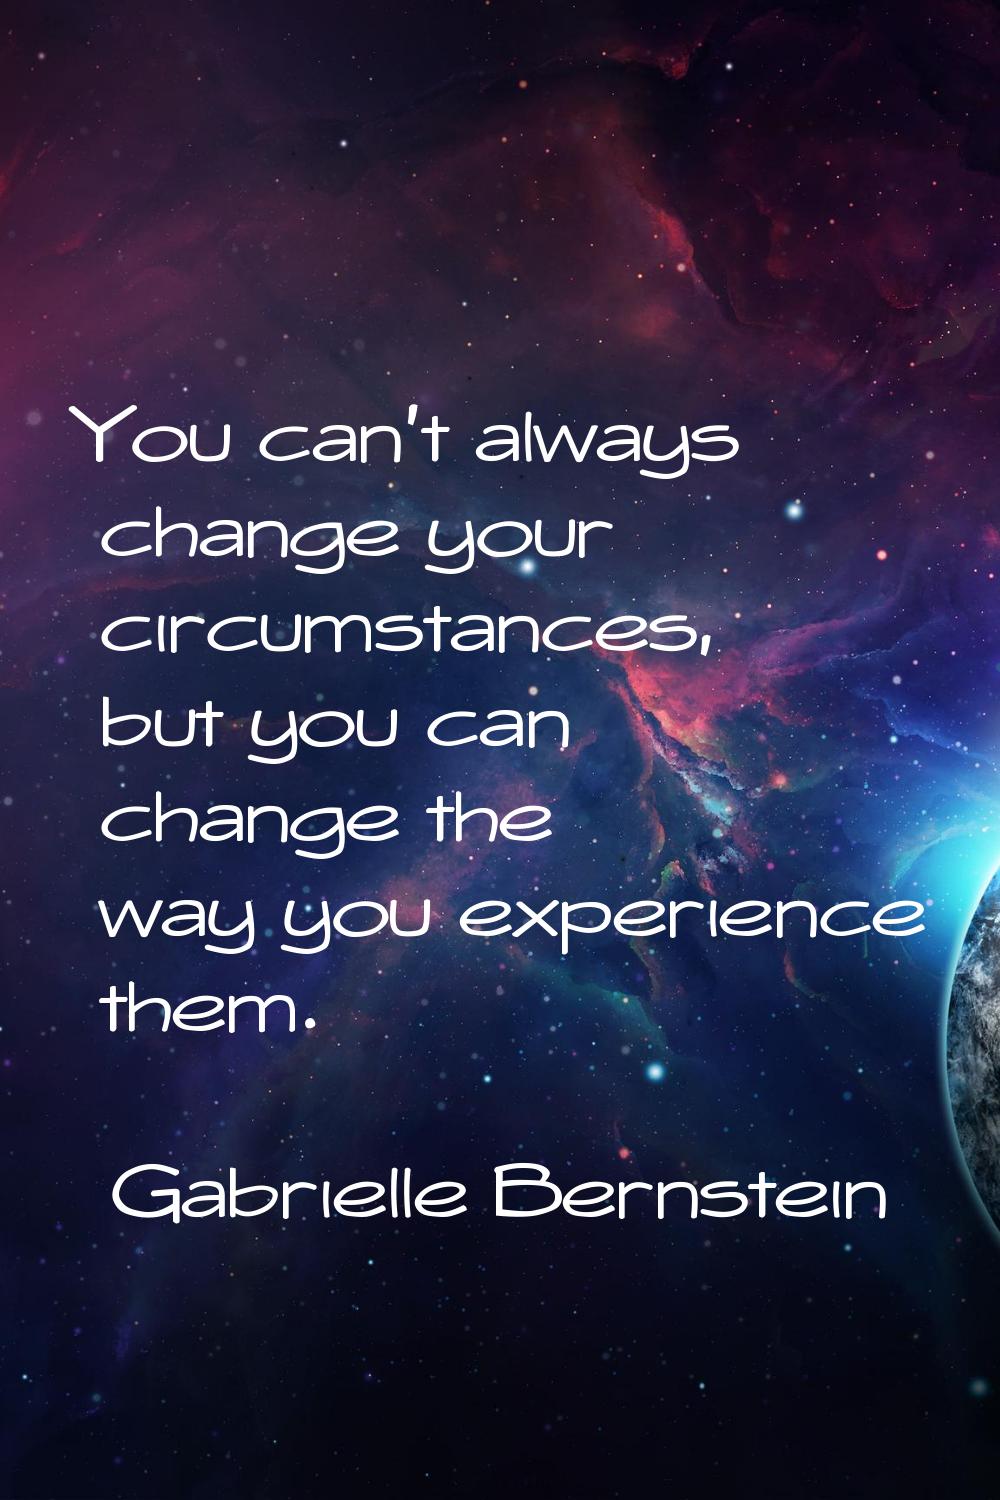 You can't always change your circumstances, but you can change the way you experience them.